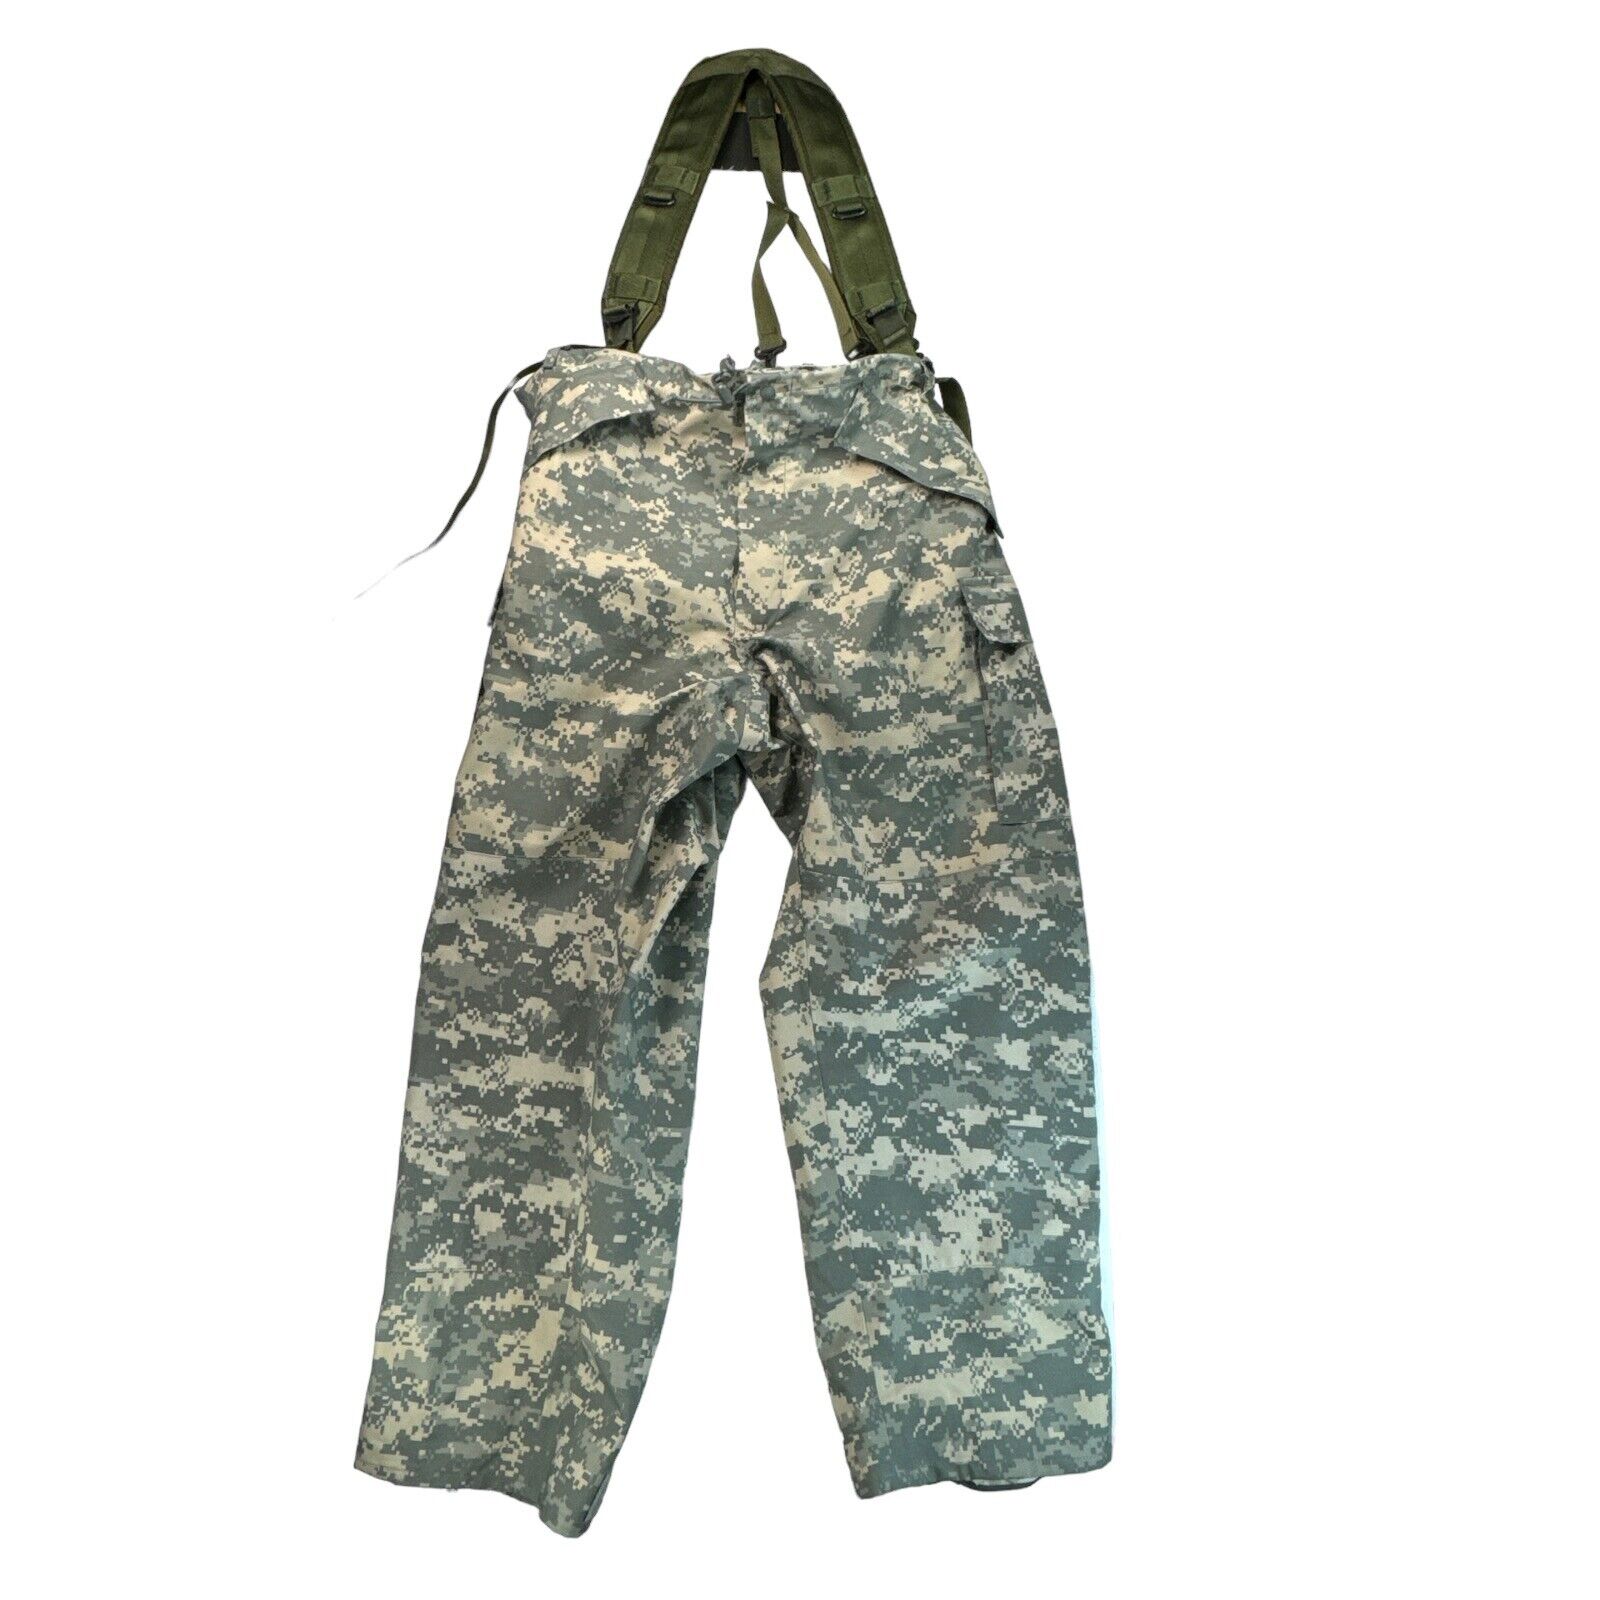 Army Cold Weather Gortex Trousers Digital Camouflage L Reg US Army w/ Suspenders